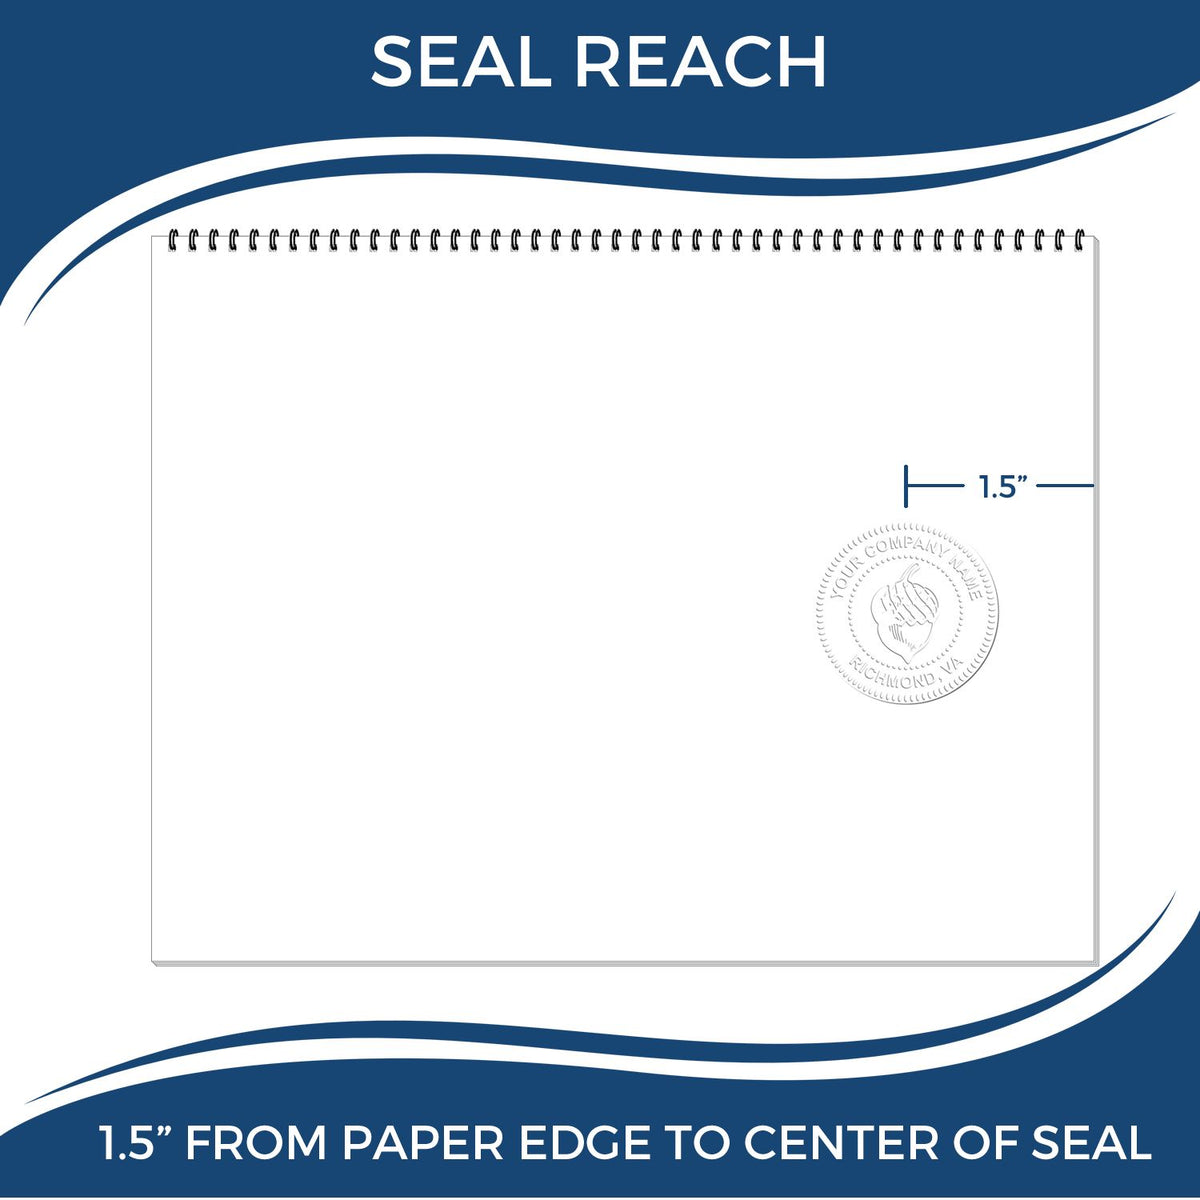 An infographic showing the seal reach which is represented by a ruler and a miniature seal image of the Hybrid Nevada Landscape Architect Seal